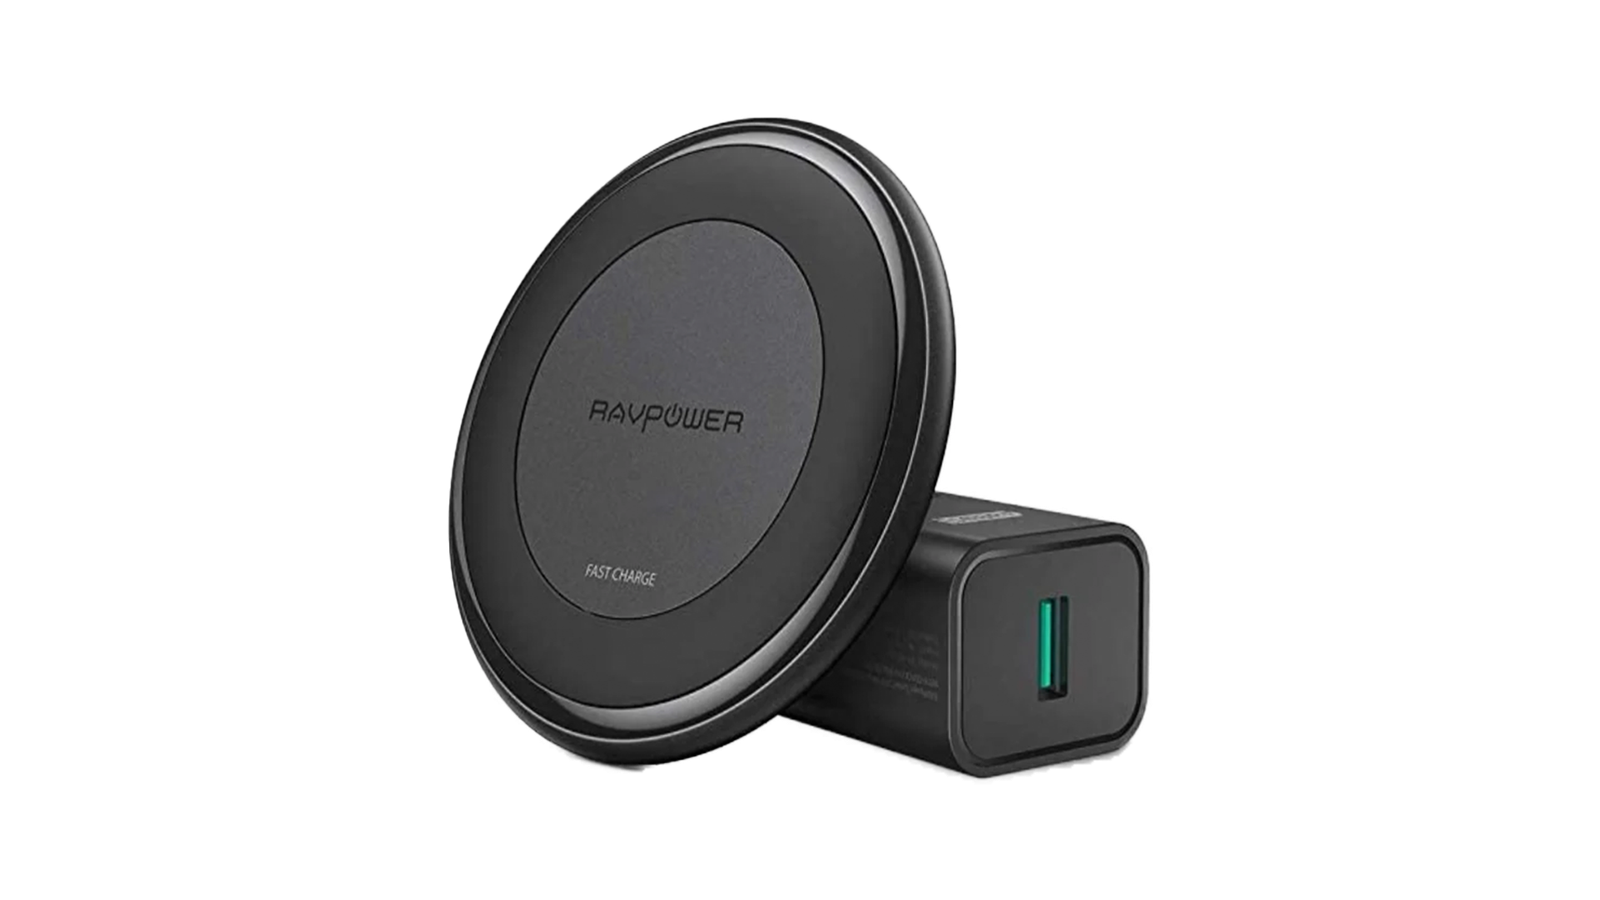 RAVPower Fast Wireless Charger - Best Wireless Charger for Travel